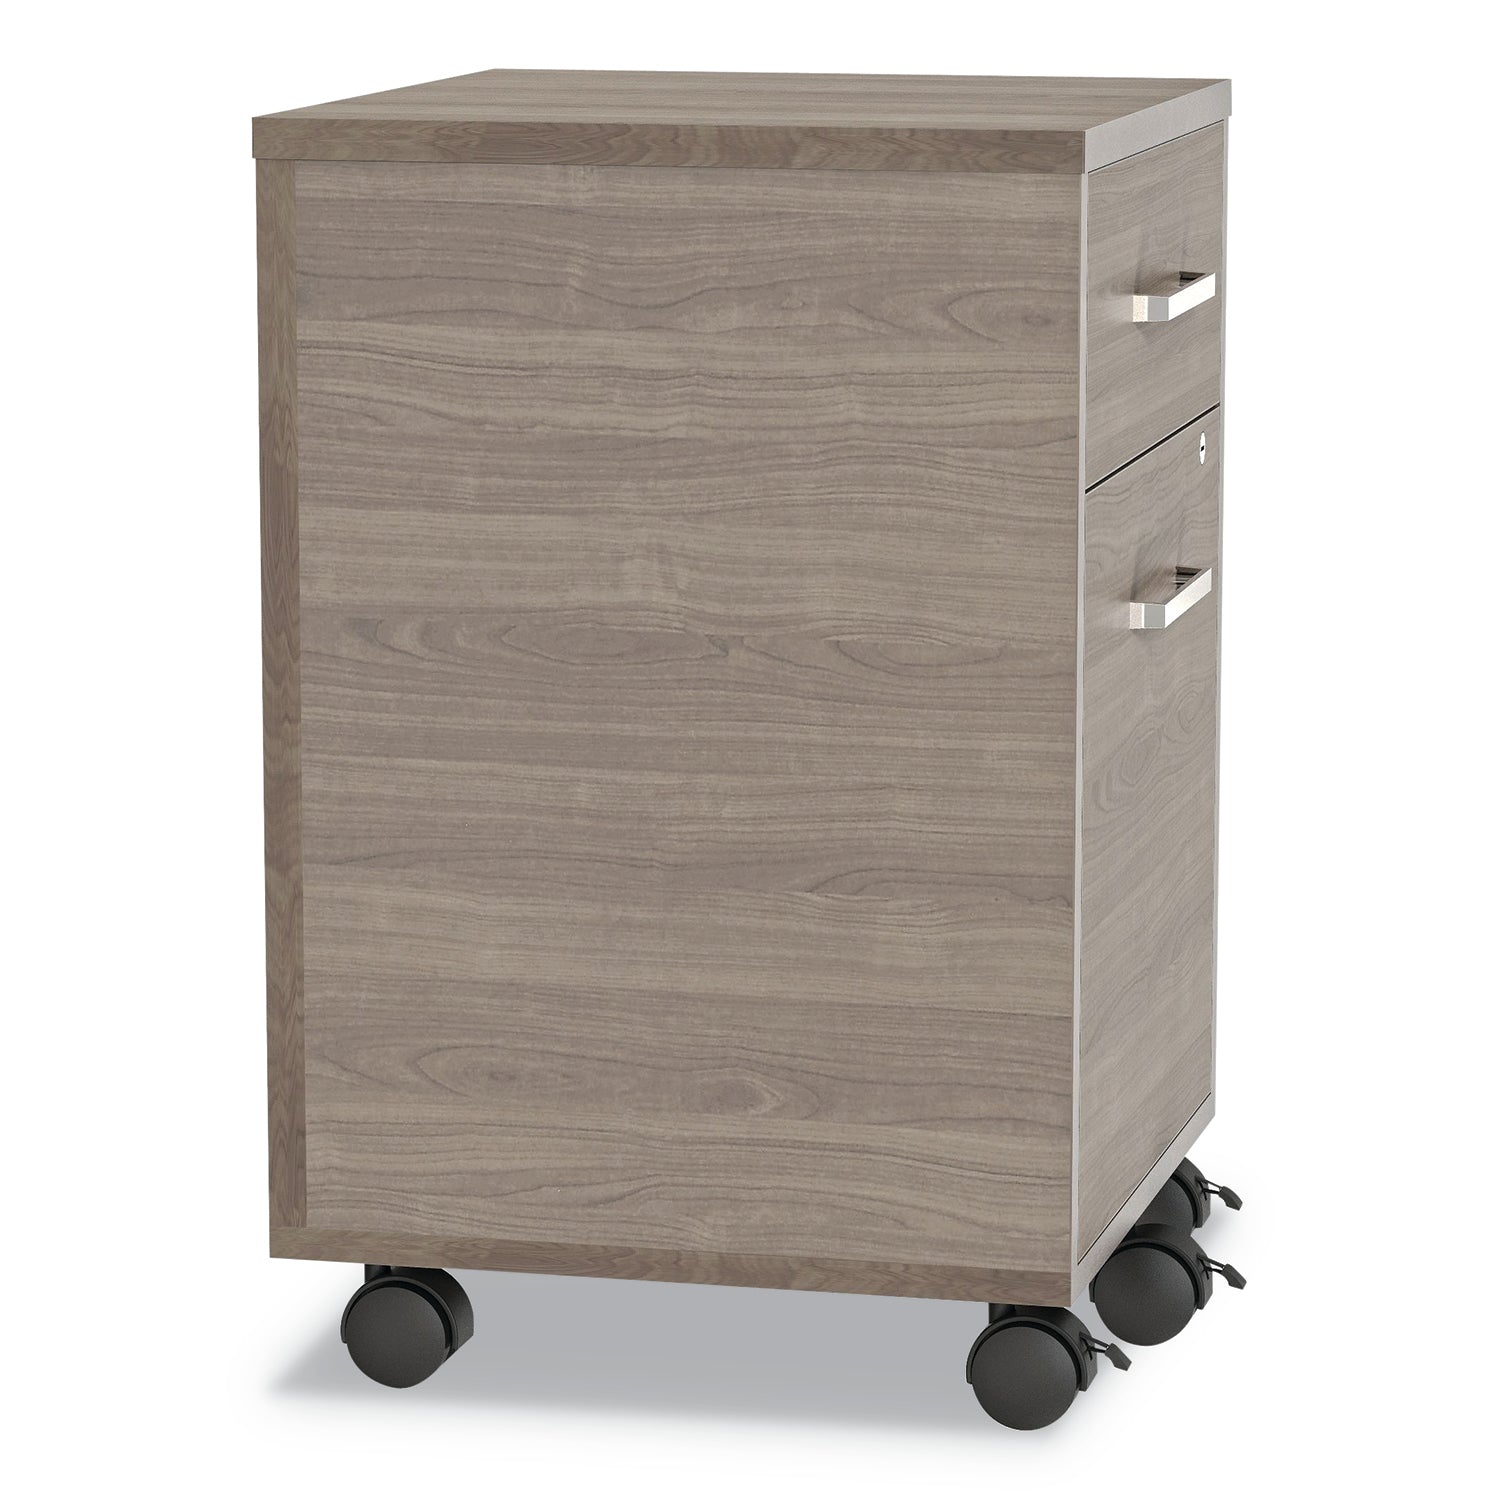 urban-mobile-file-pedestal-left-or-right-2-drawers-box-file-legal-a4-natural-walnut-16-x-1525-x-2375_litur610nw - 3